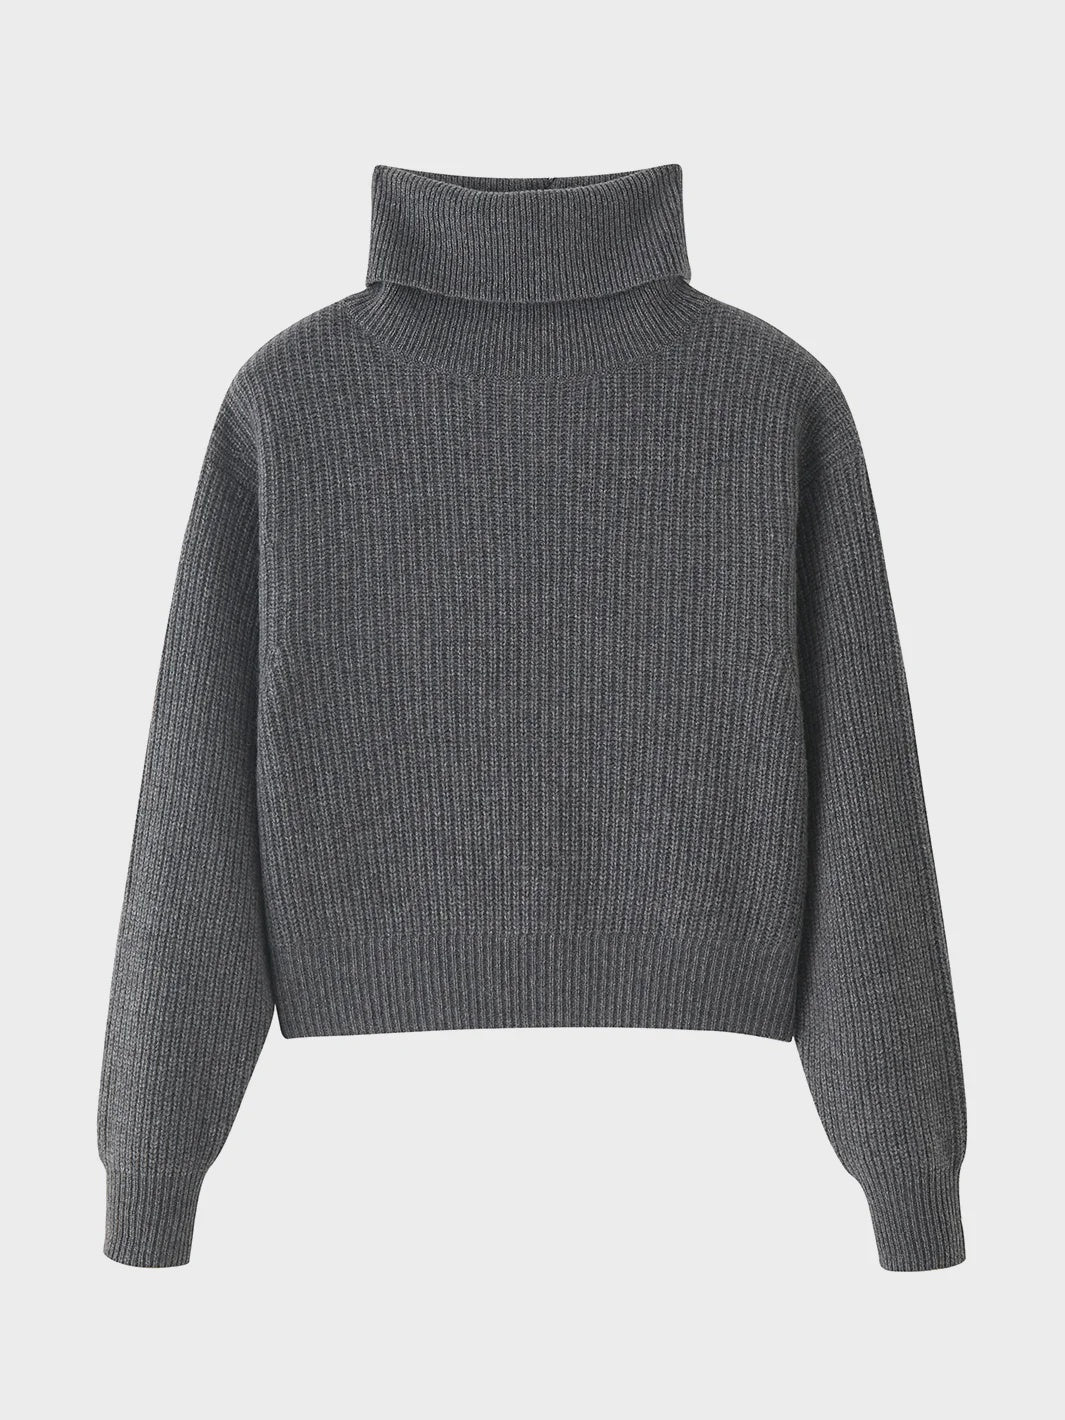 Naia Recycled Cashmere Turtleneck